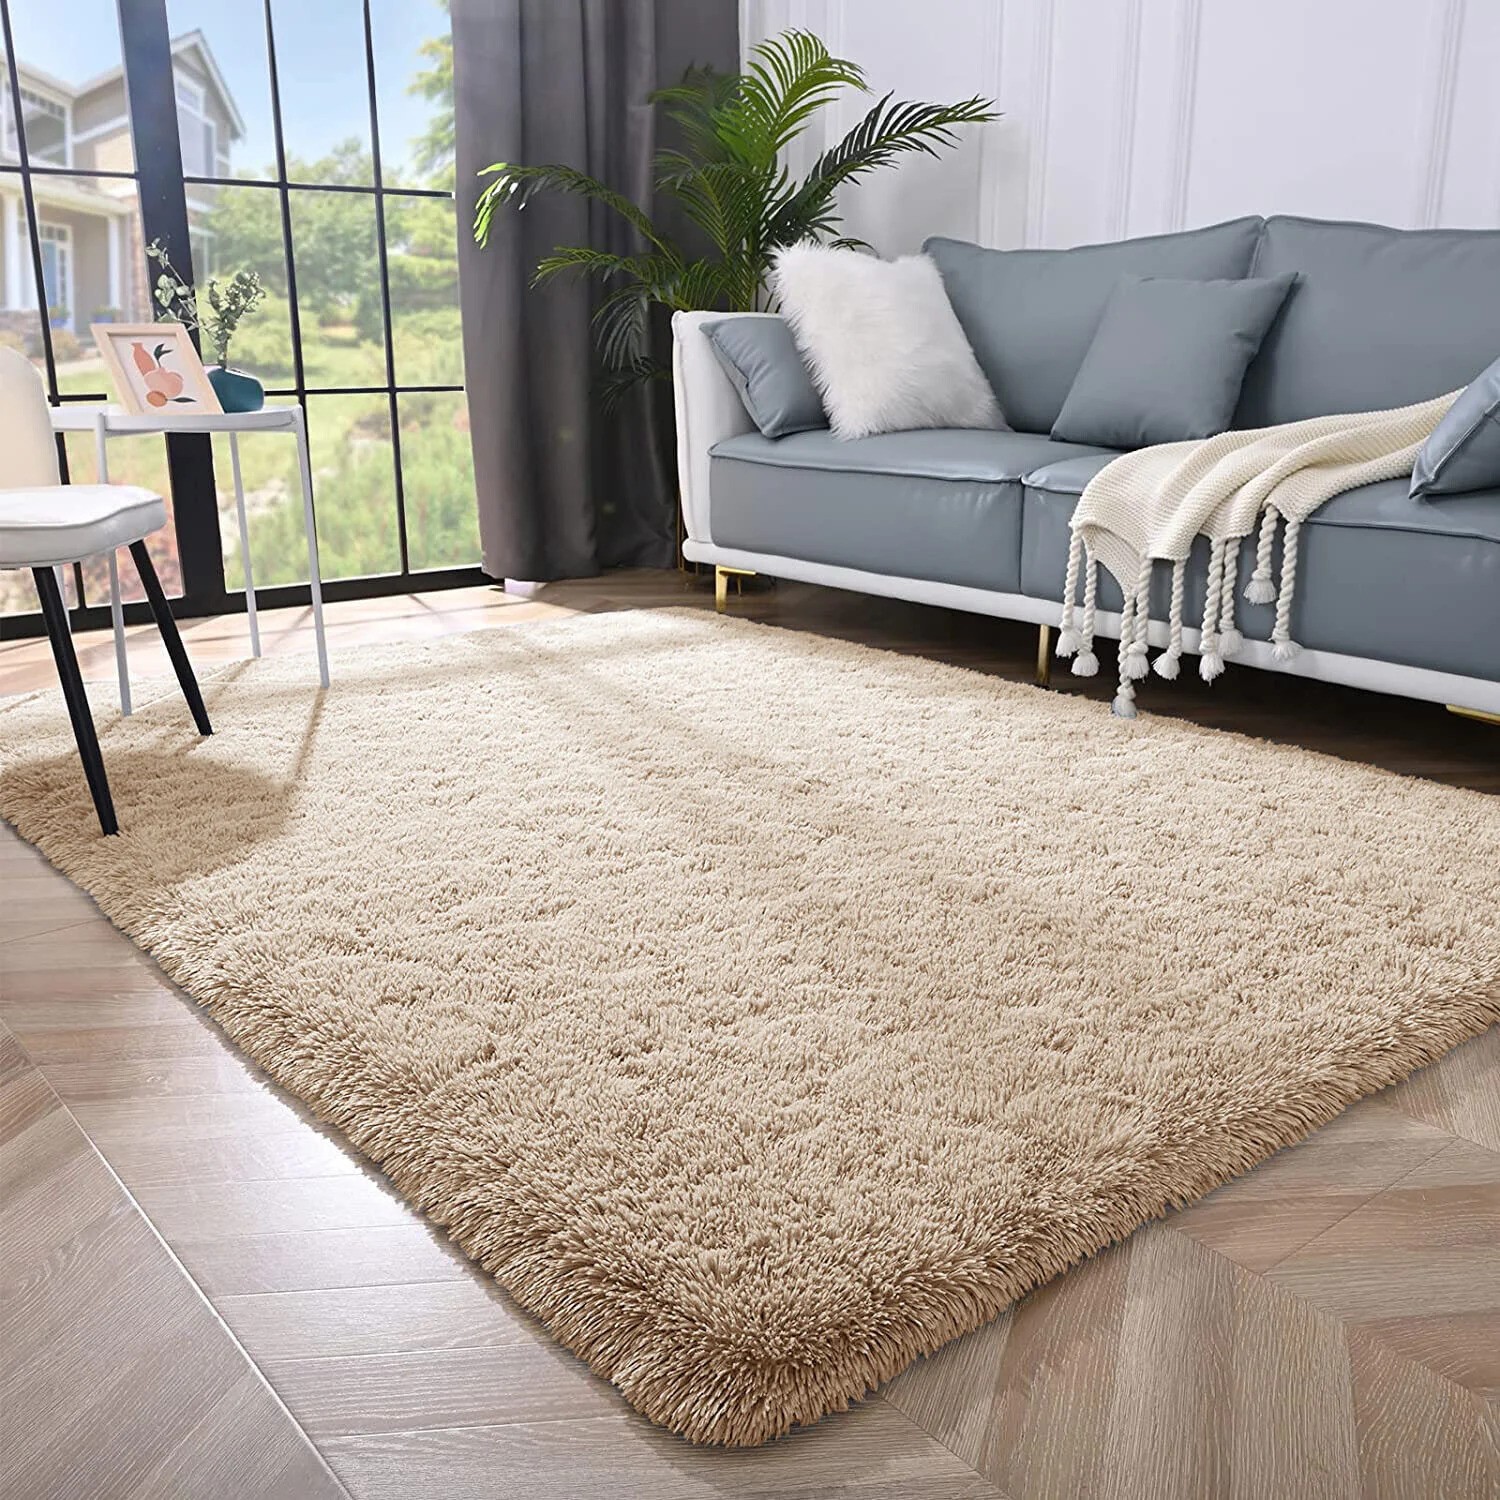 What To Look For In A Shaggy Rug?